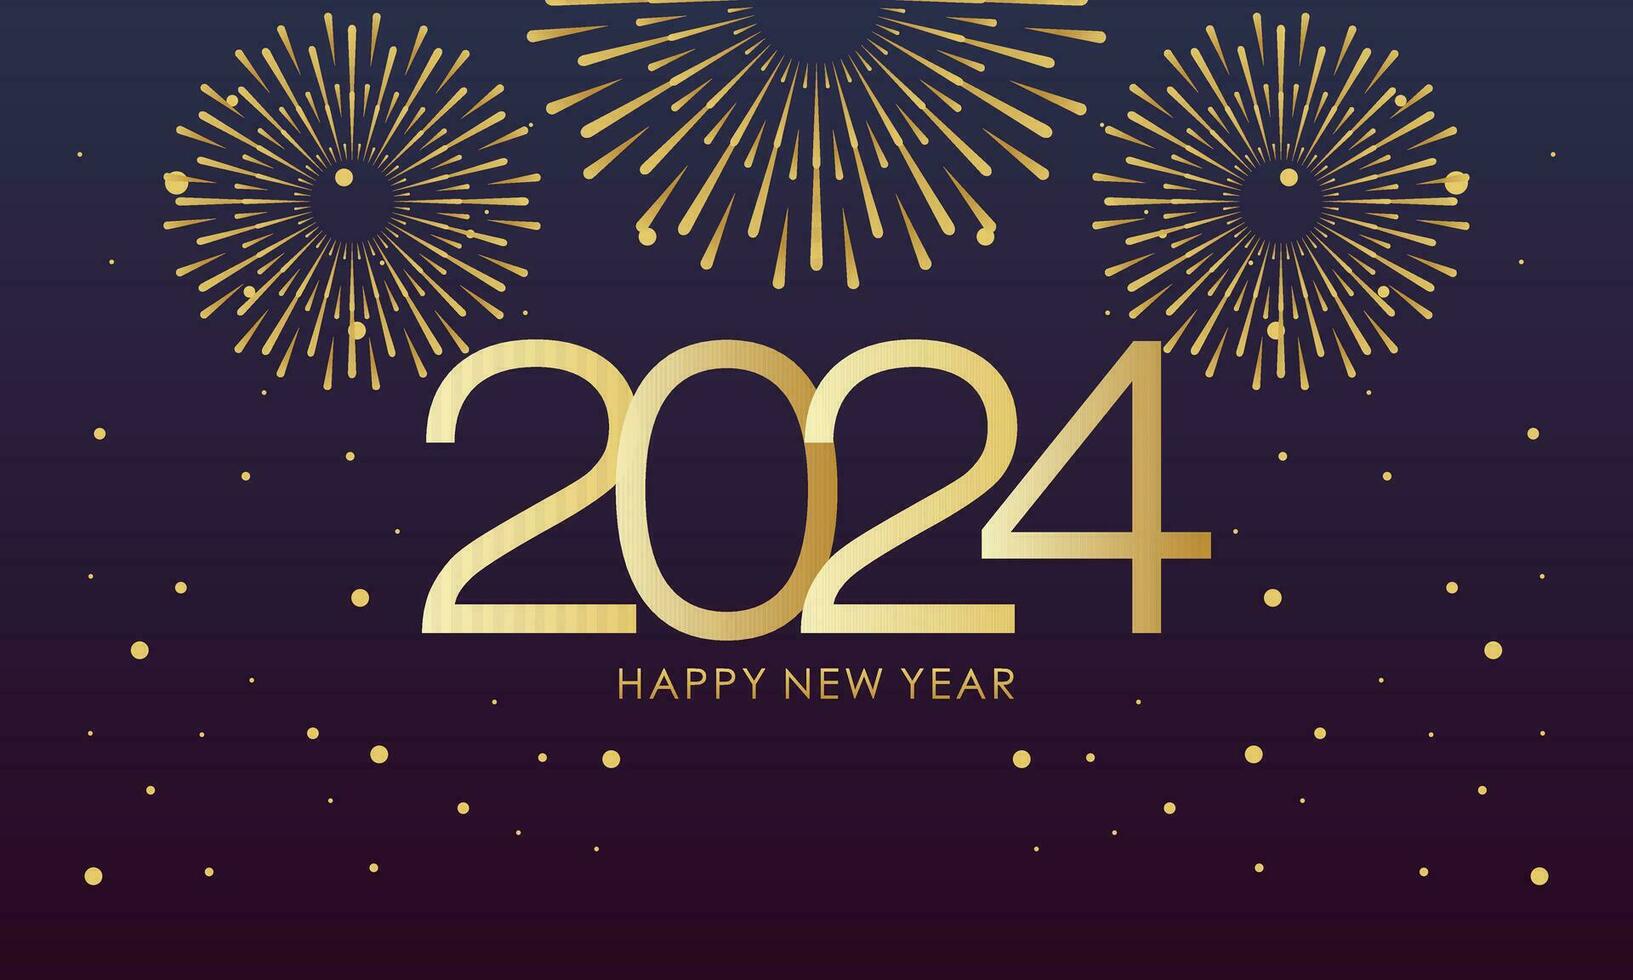 Elegant Background of Celebrating Happy New Year 2024 with Fireworks vector